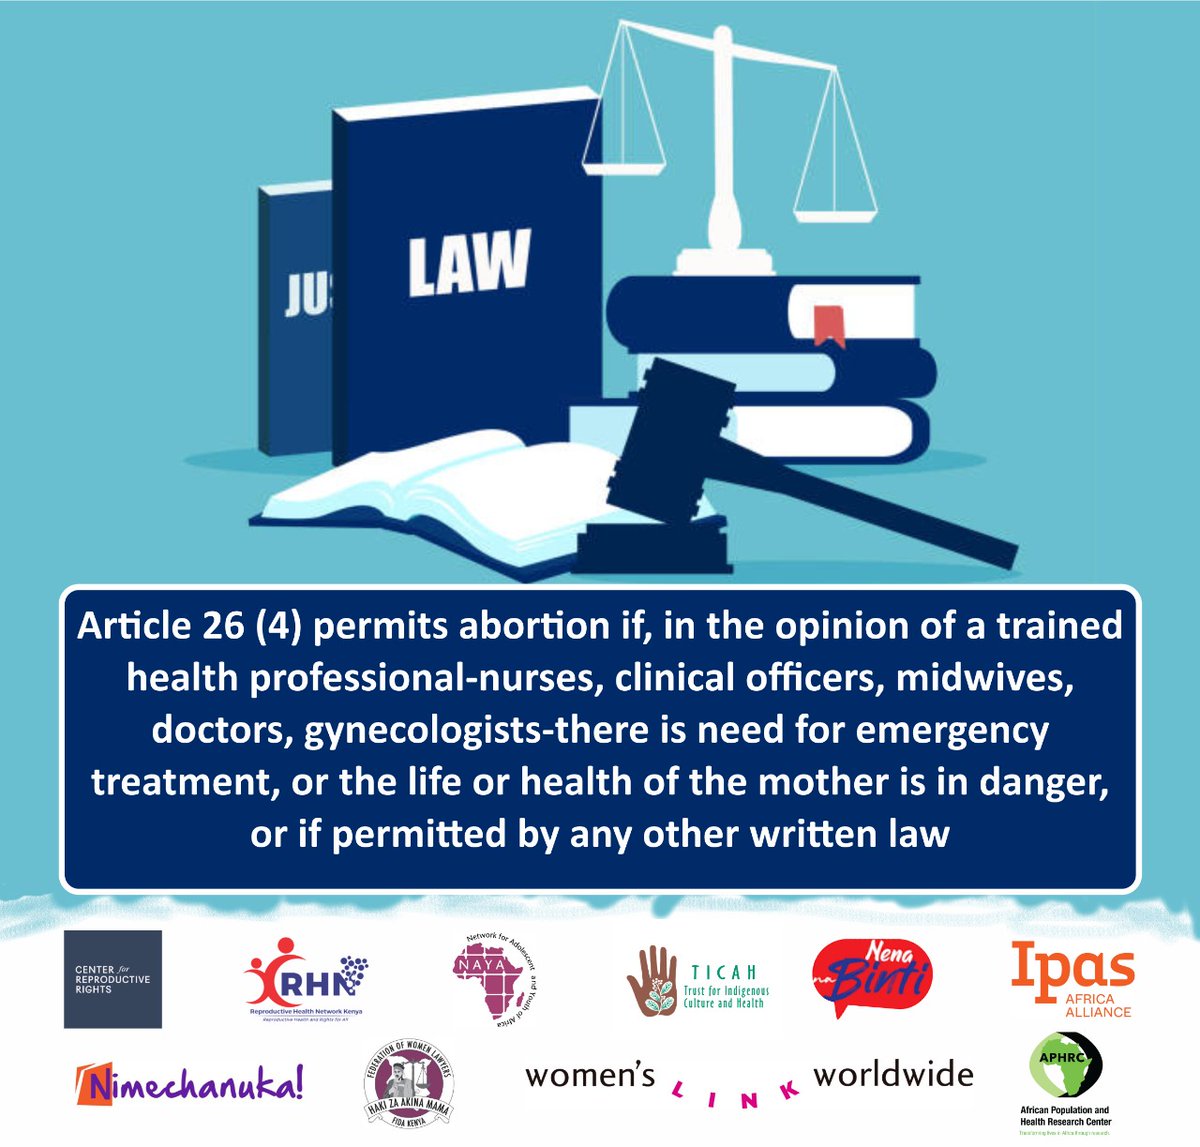 Article 26 (4) of the Constitution of #Kenya permits abortion on the following grounds: 🚑 there is need for emergency treatment ⚠️ the life or health of the mother is in danger ⚖️ if permitted by any other written law #DefendHerRightsKE